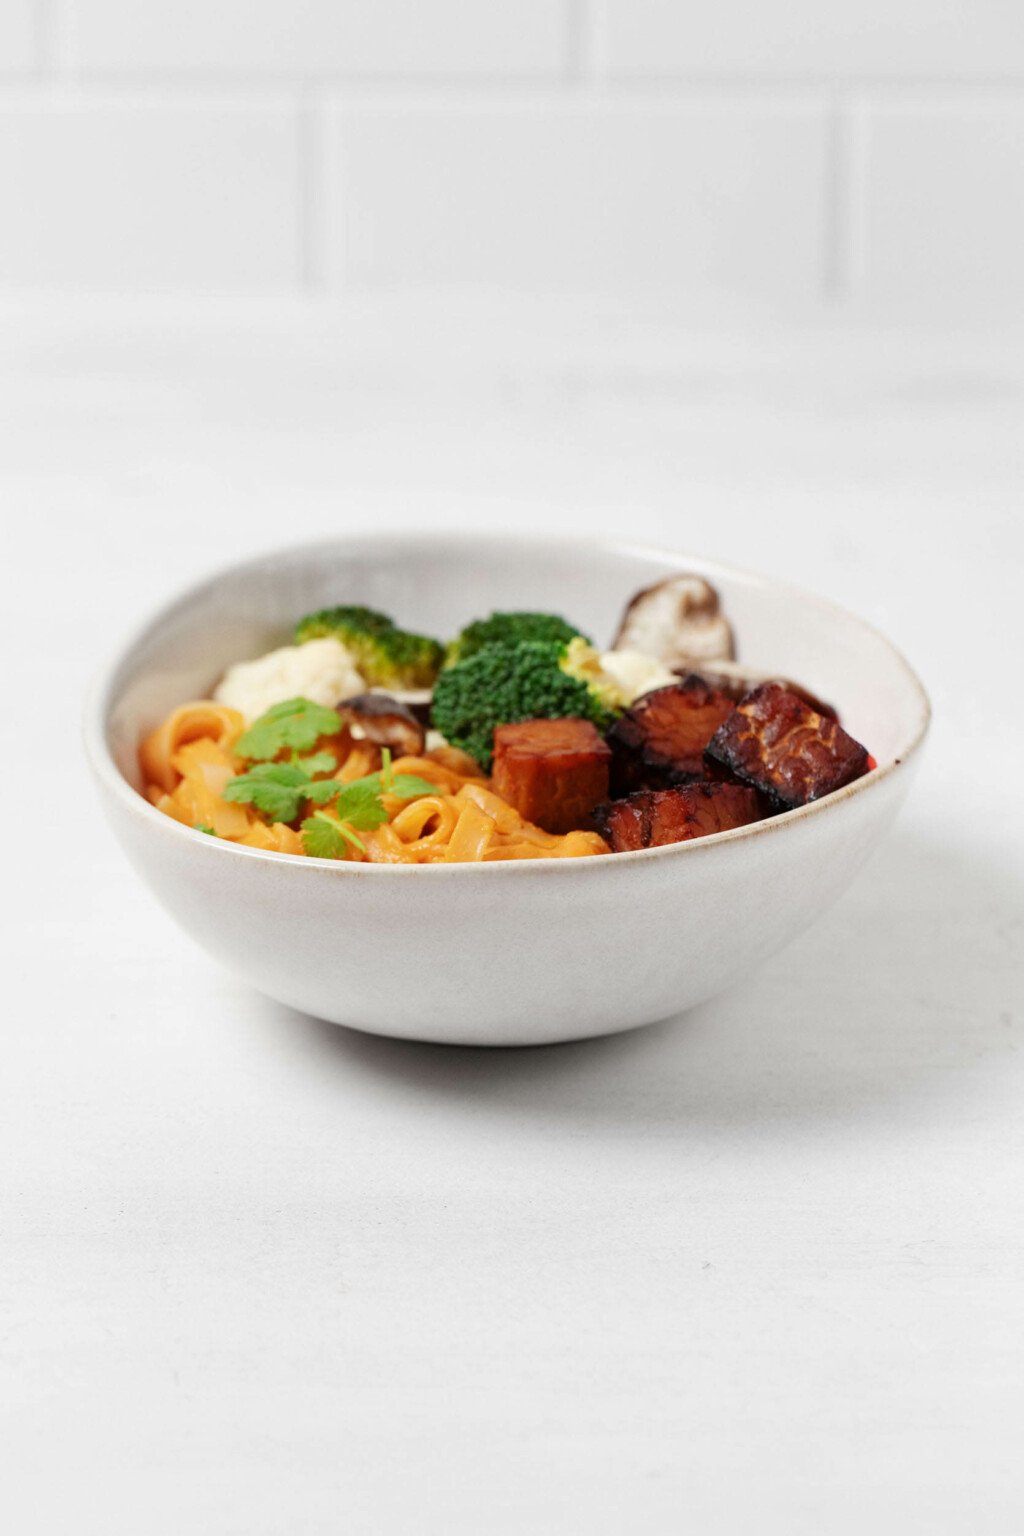 Noodles with an orange sauce, cubes of tempeh, and vegetables are piled into an asymmetrically shaped, oval bowl. It is pictured against a white surface.